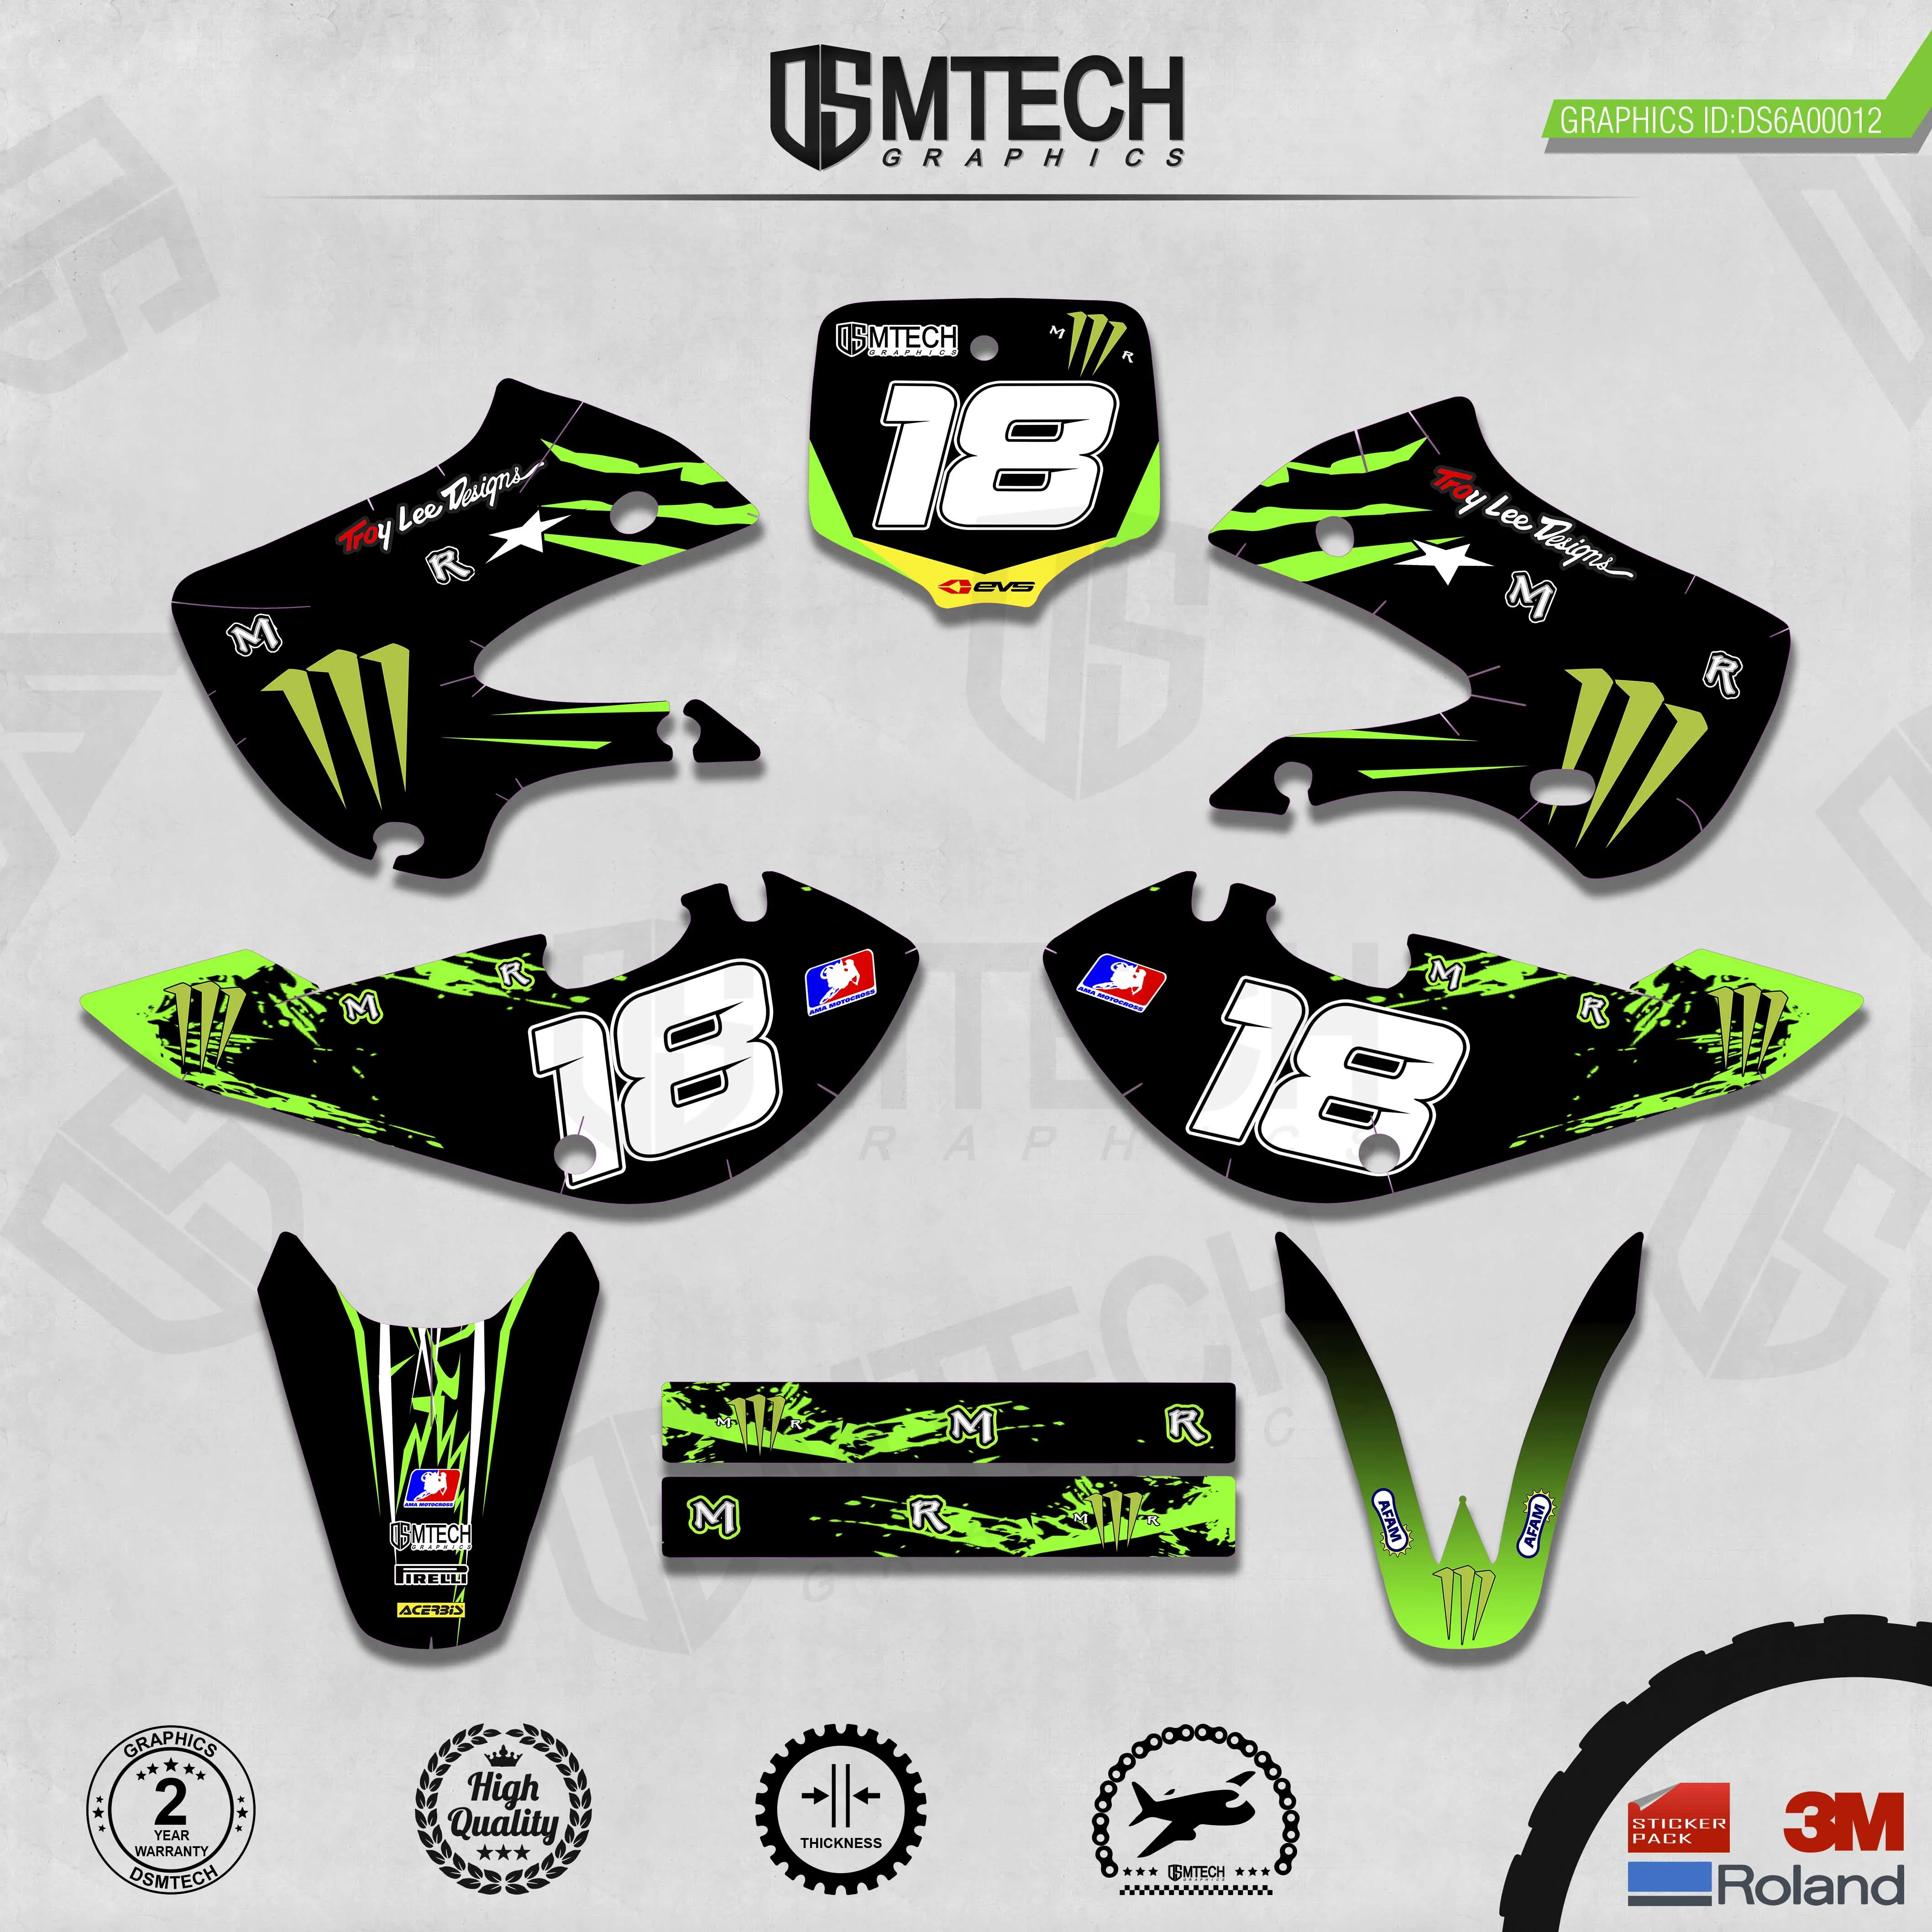 DSMTECH Customized Team Graphics Backgrounds Decals 3M Custom Stickers For KAWASAKI  2000-2020 KX65 012